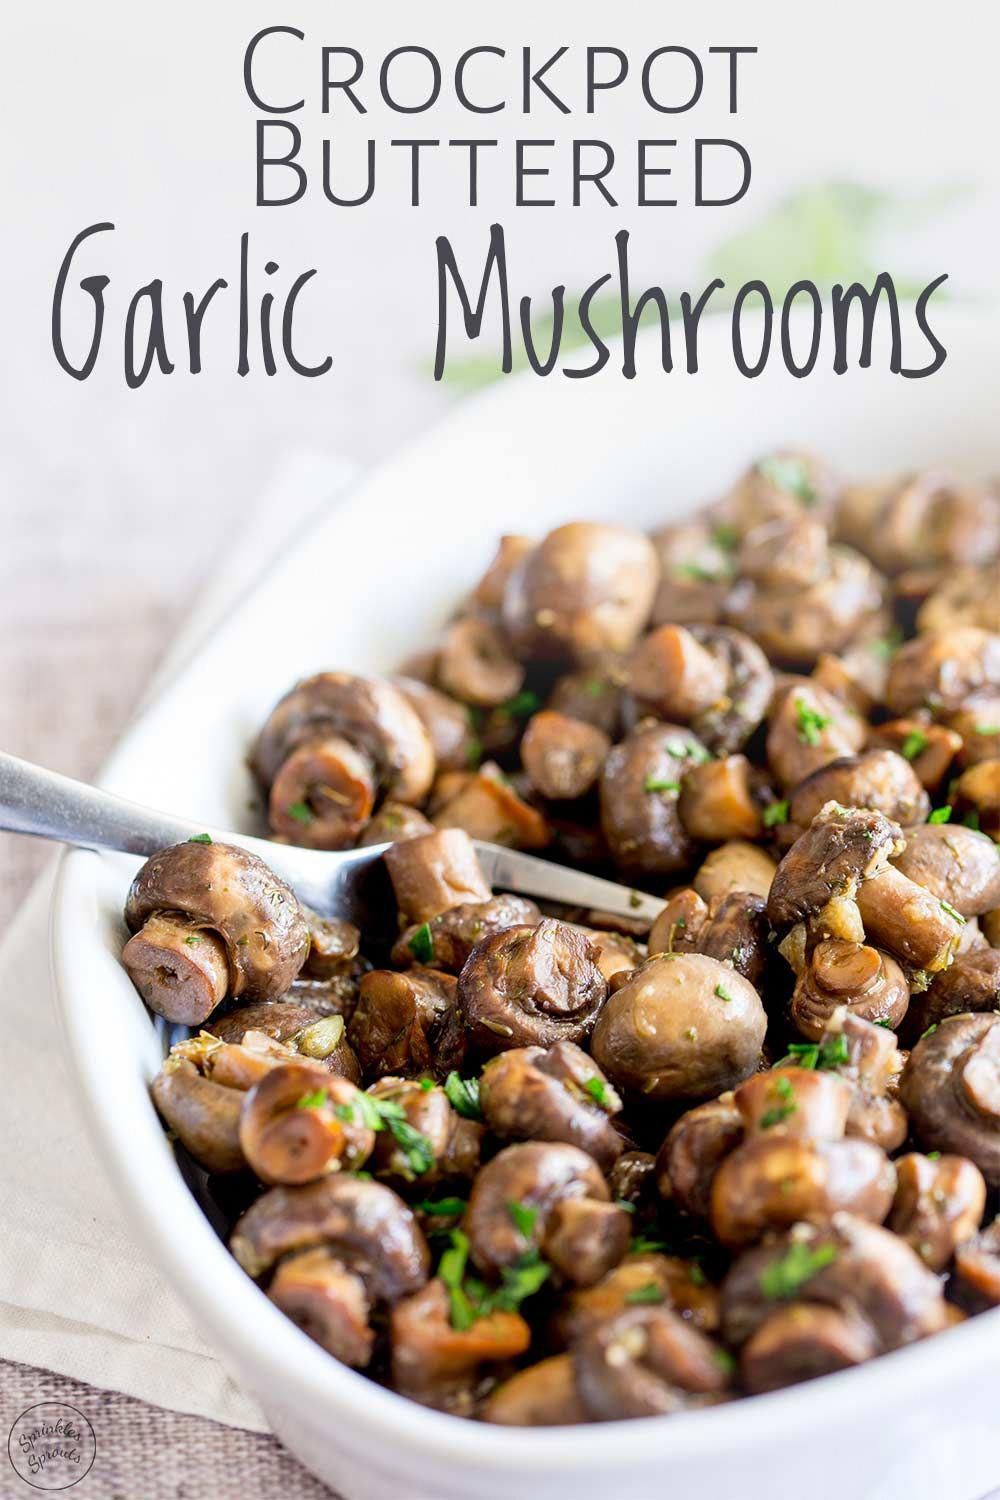 Crockpot Buttered Garlic Mushrooms | Sprinkles and Sprouts -   19 thanksgiving recipes side dishes healthy ideas